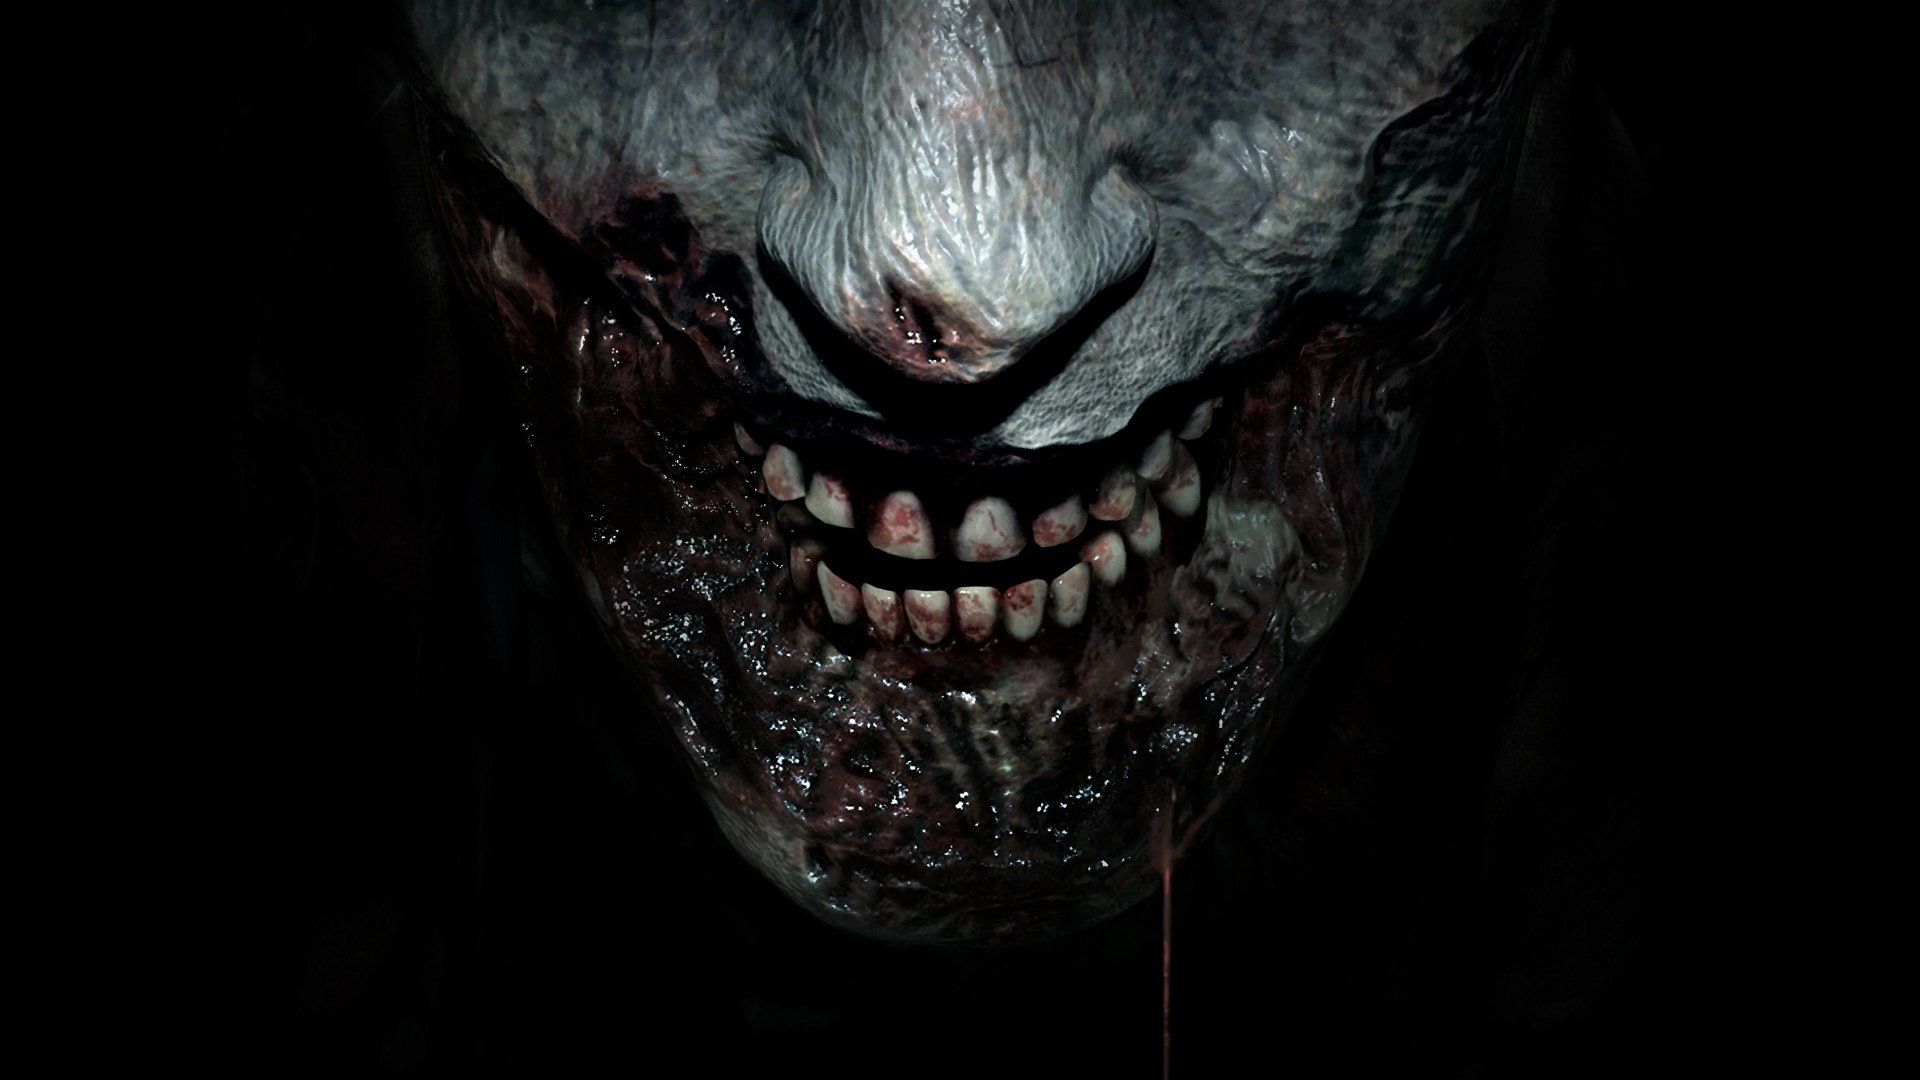 Zombie's Face 4k Ultra HD Wallpaper | Background Image ...